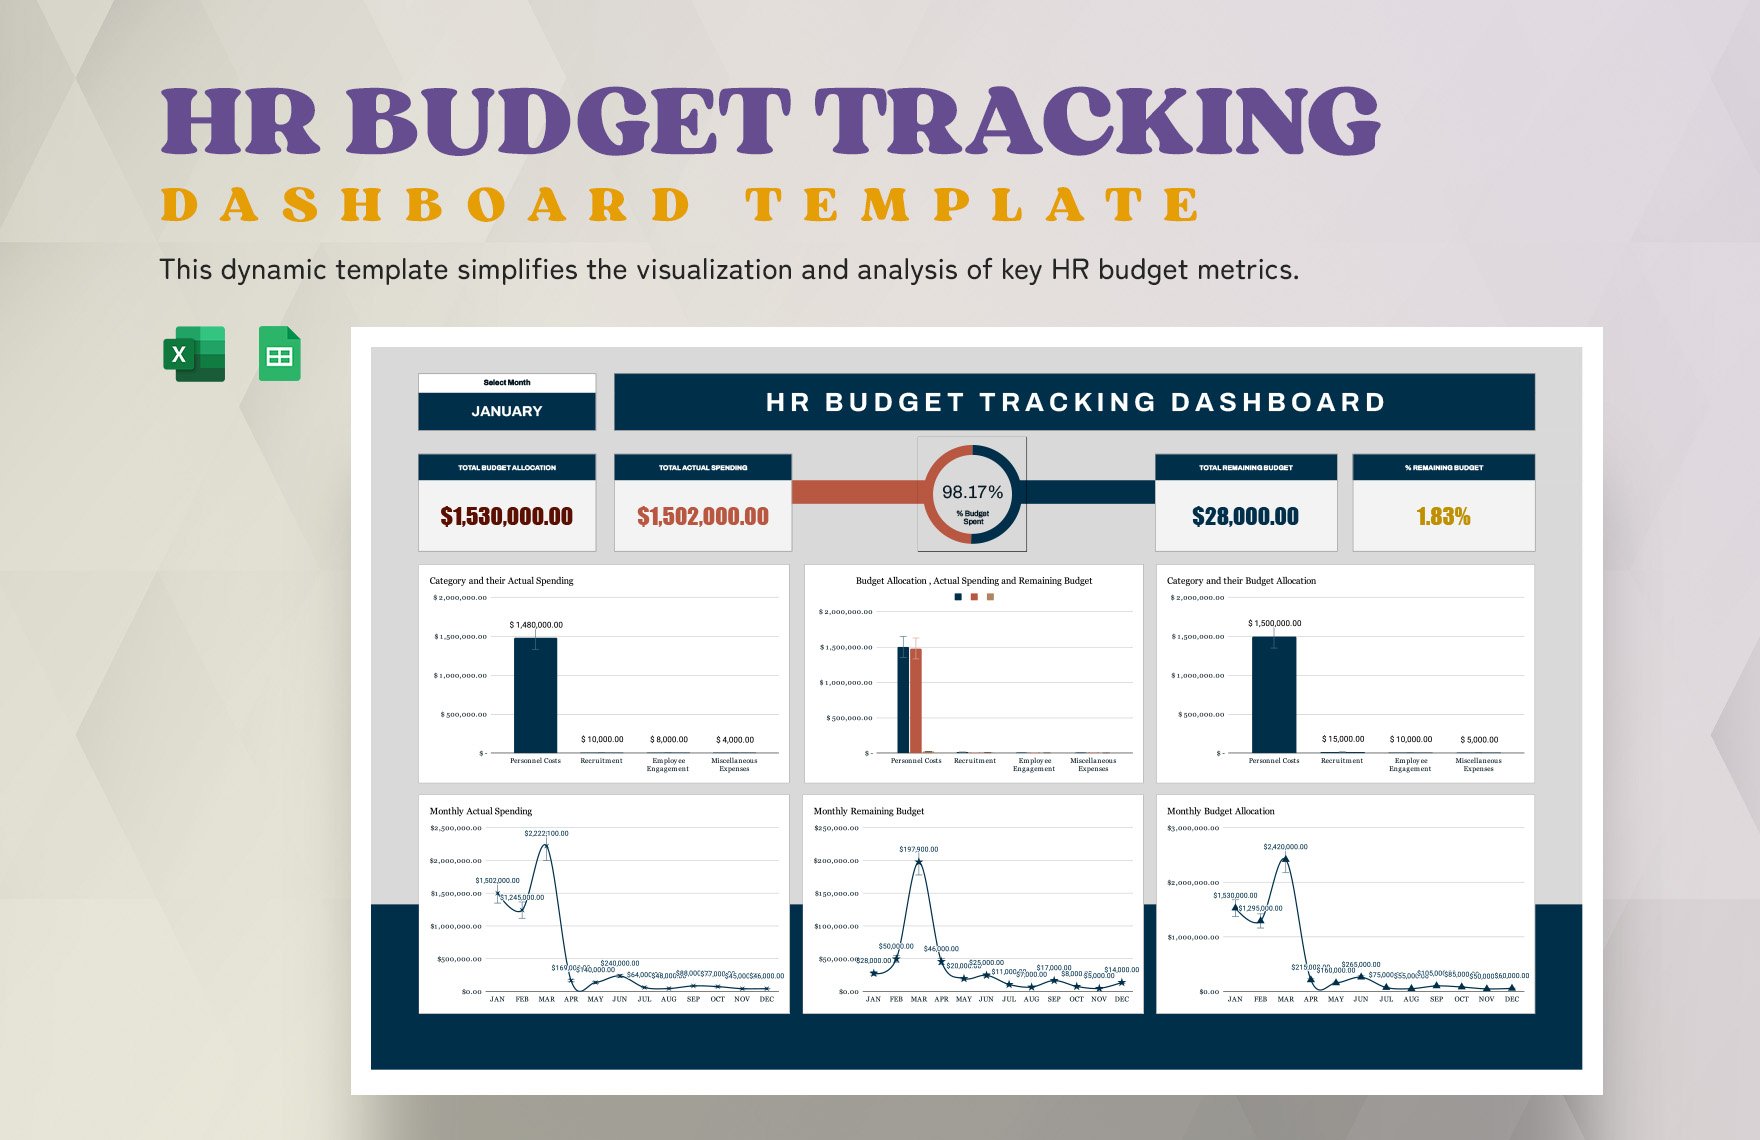 HR Budget Tracking Dashboard Template